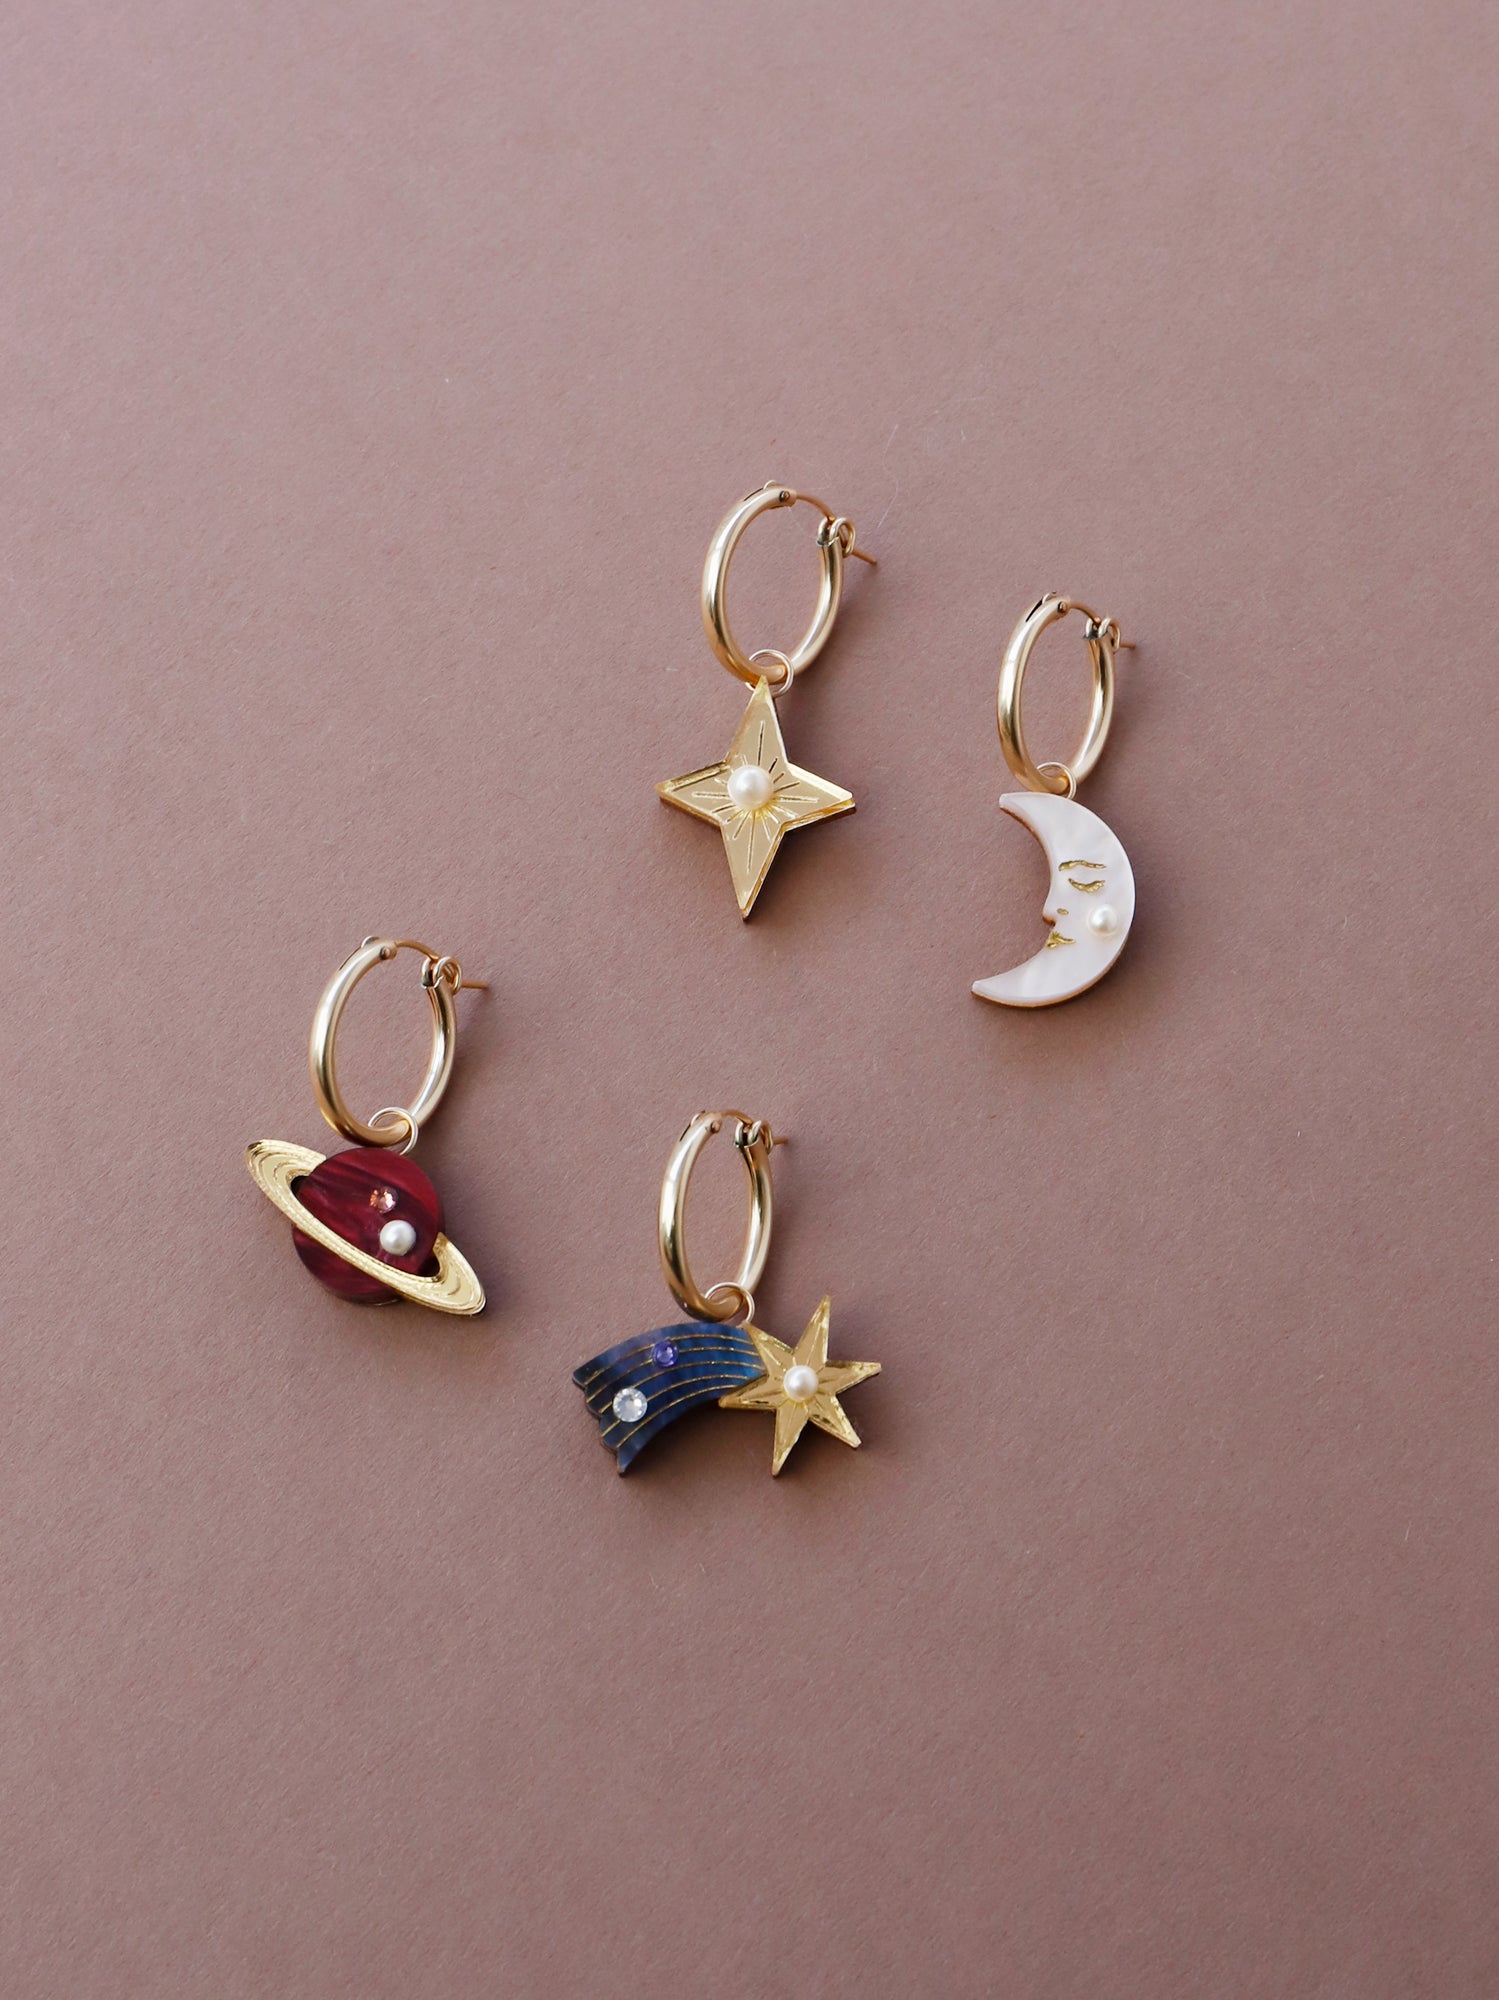 Mix ‘n’ match celestial charm set made with acrylic and glass pearls. This hoop set includes 4 x interchangeable charms. Wear with our 14k gold-filled hoops. This set includes: 1x 'Moon' charm, 1x ‘Star’ charm , 1 x 'Shooting Star' charm, 1 x 'Saturn' charm. Handmade in London by Wolf & Moon.